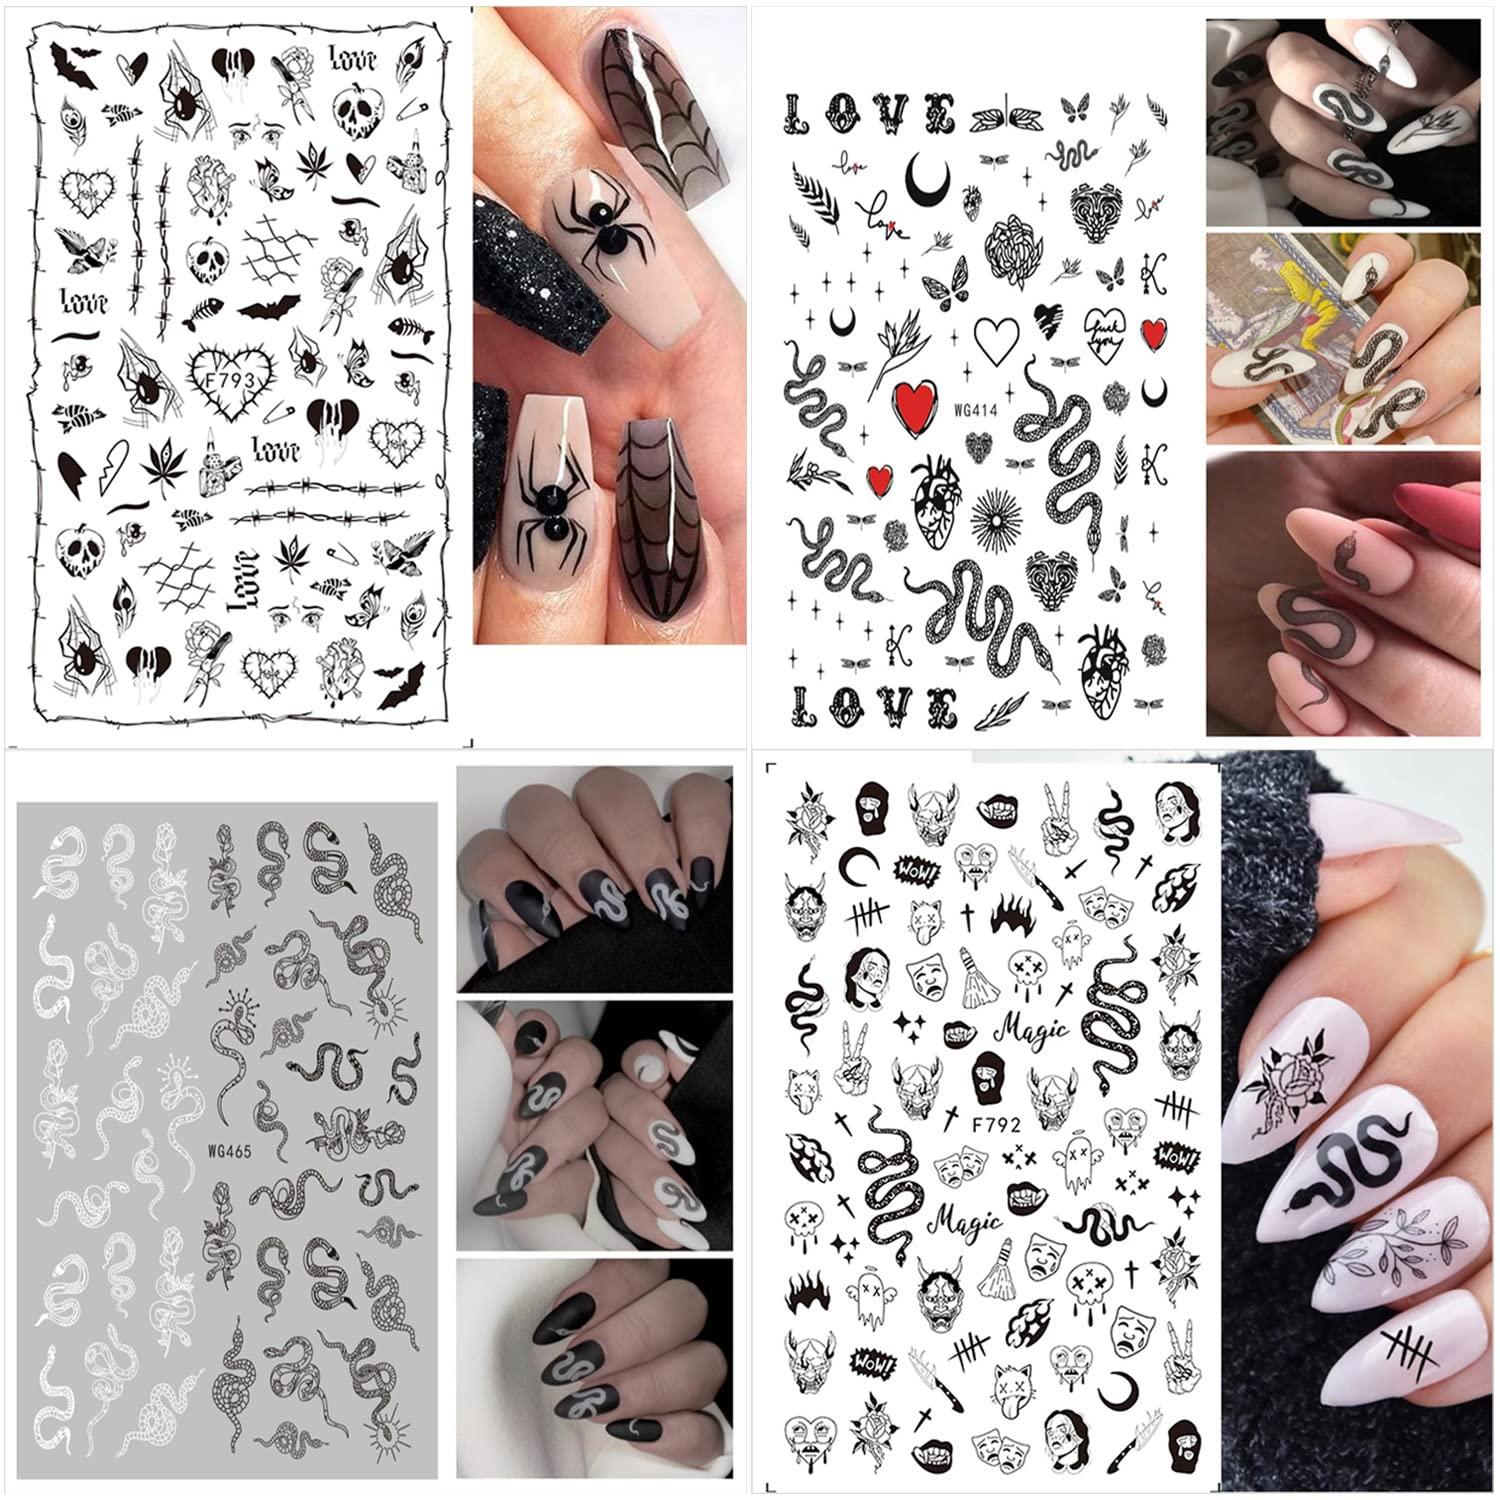 5D Gothic Black Leather Strap Nail Art Stickers